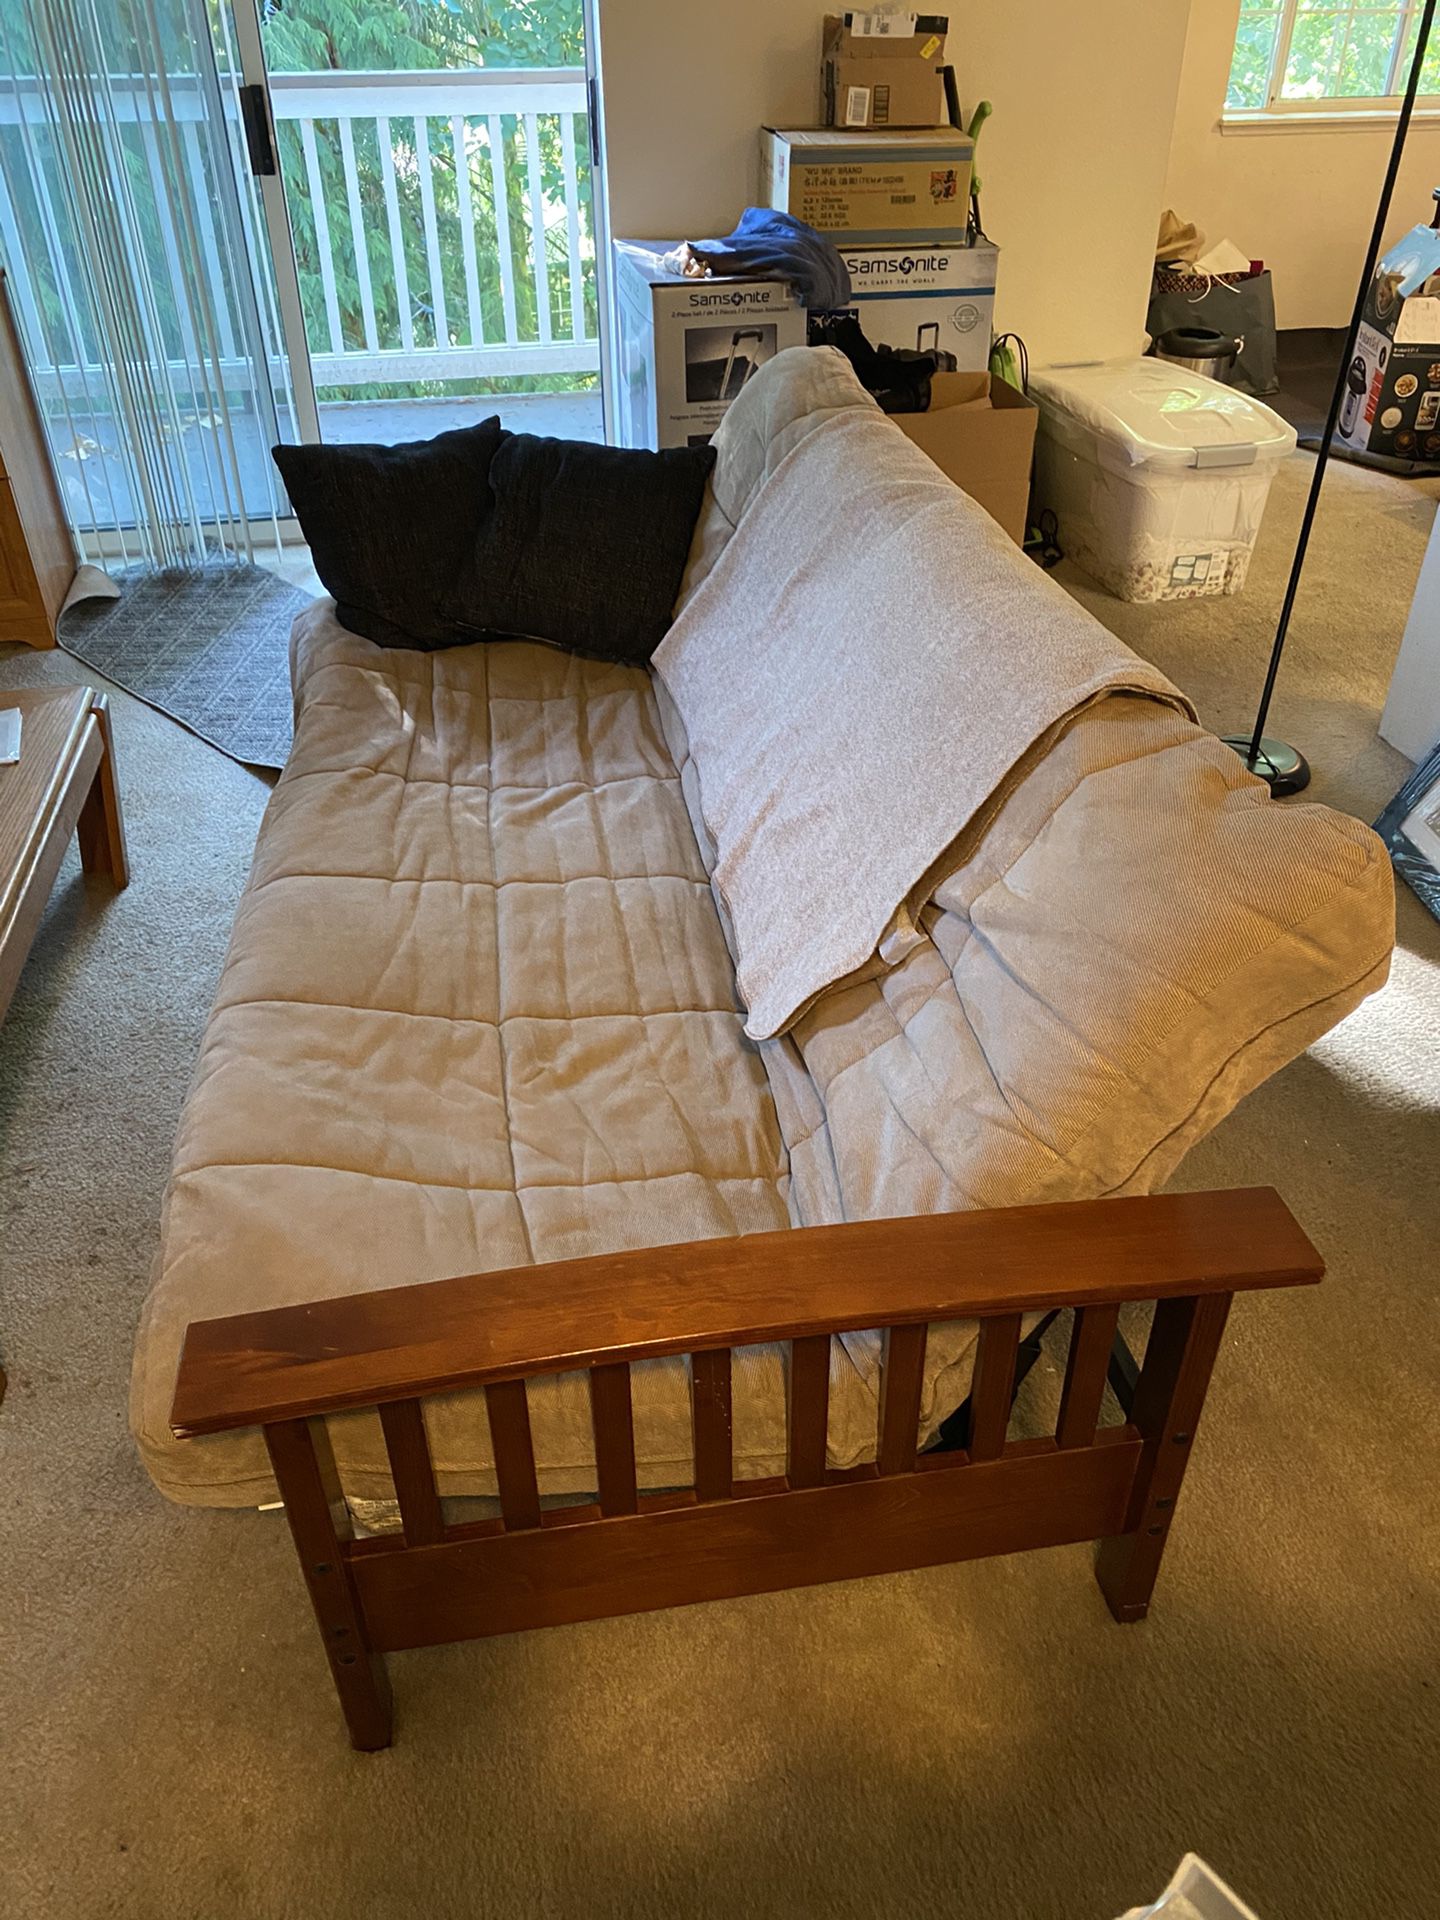 Daybed Futons Sofa beds two pillows and blanket included